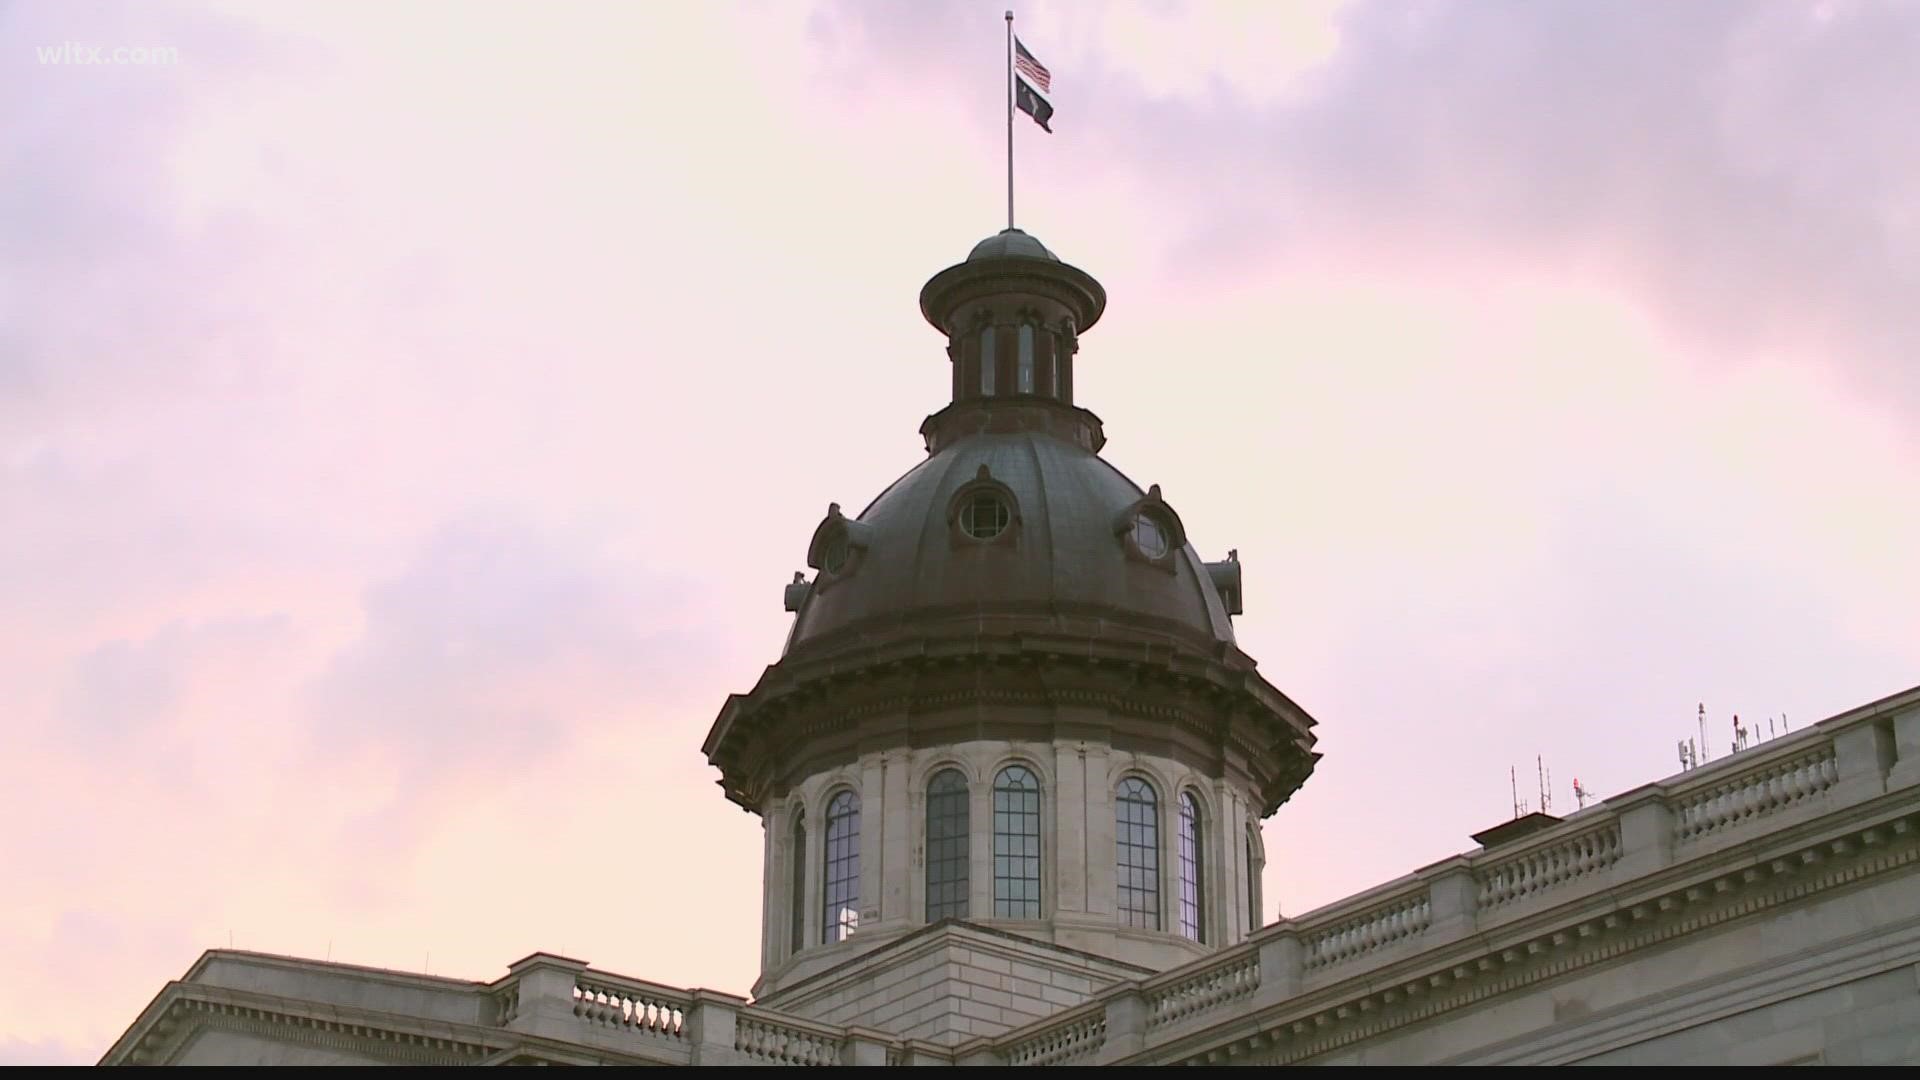 Several powerful House and Senate lawmakers recently met for about 10 minutes to talk about South Carolina’s budget without reaching an agreement.